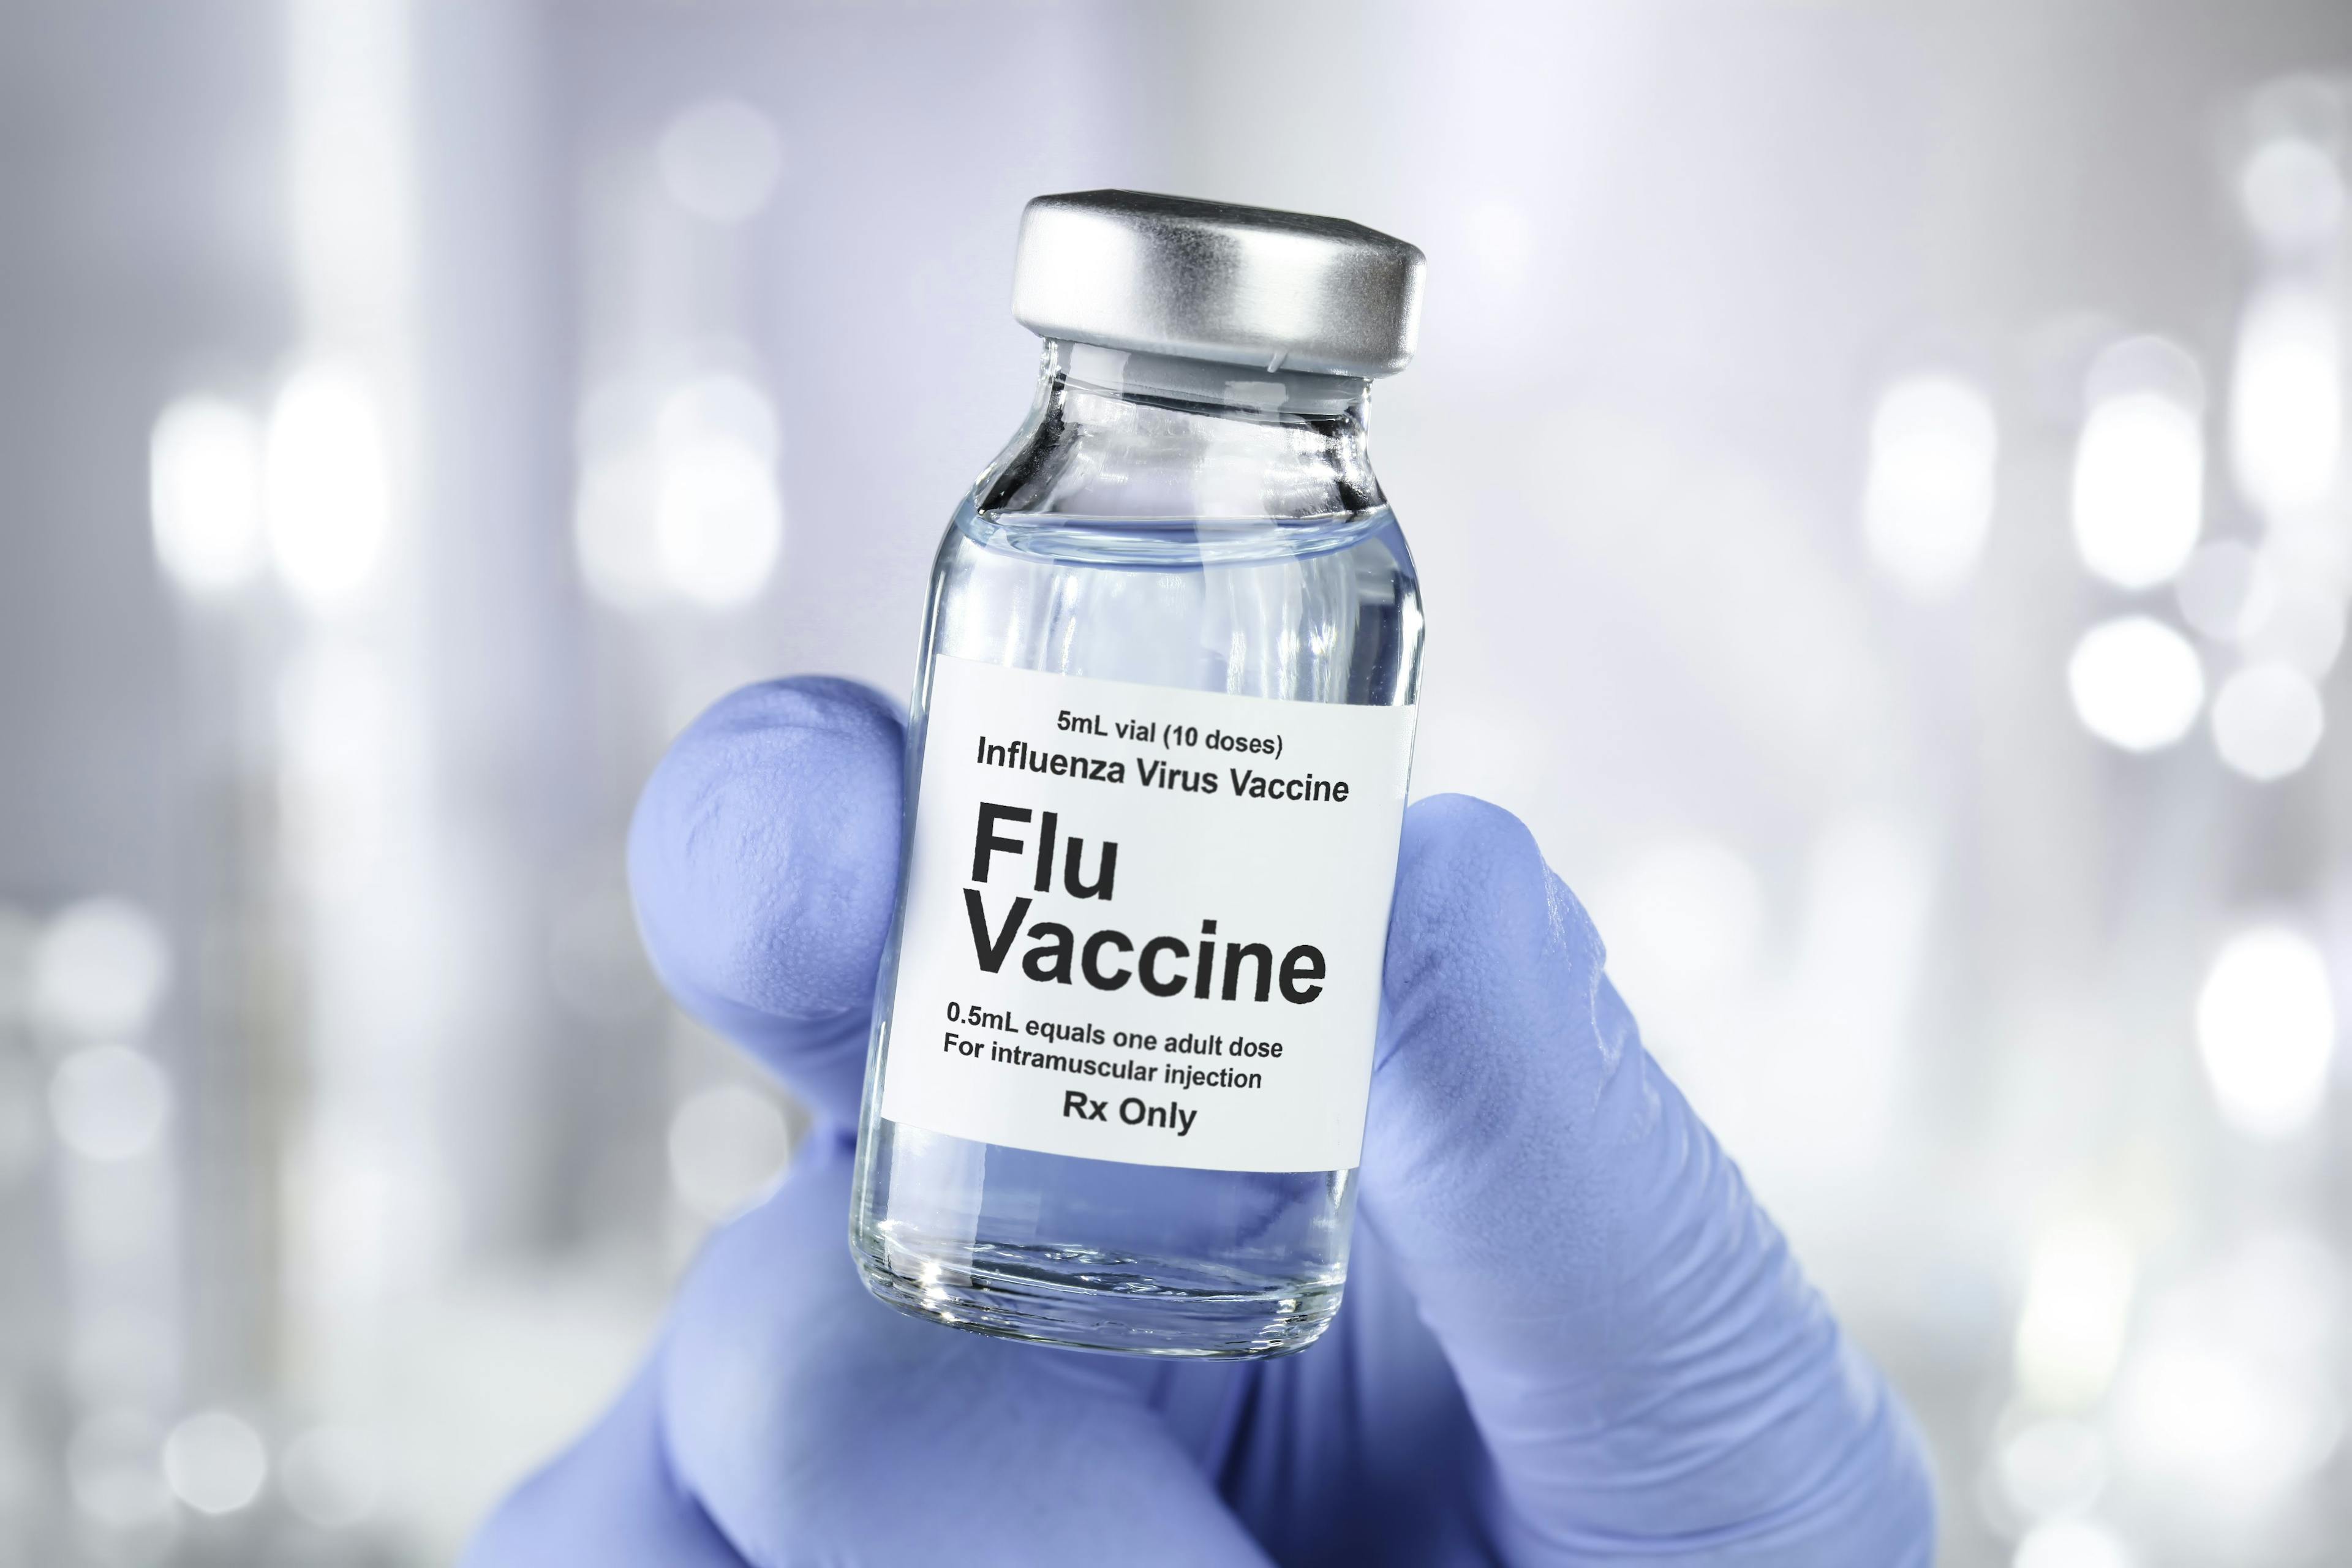 Flu Vaccine May Reduce Some of the Severe Effects of COVID-19, New Study Finds